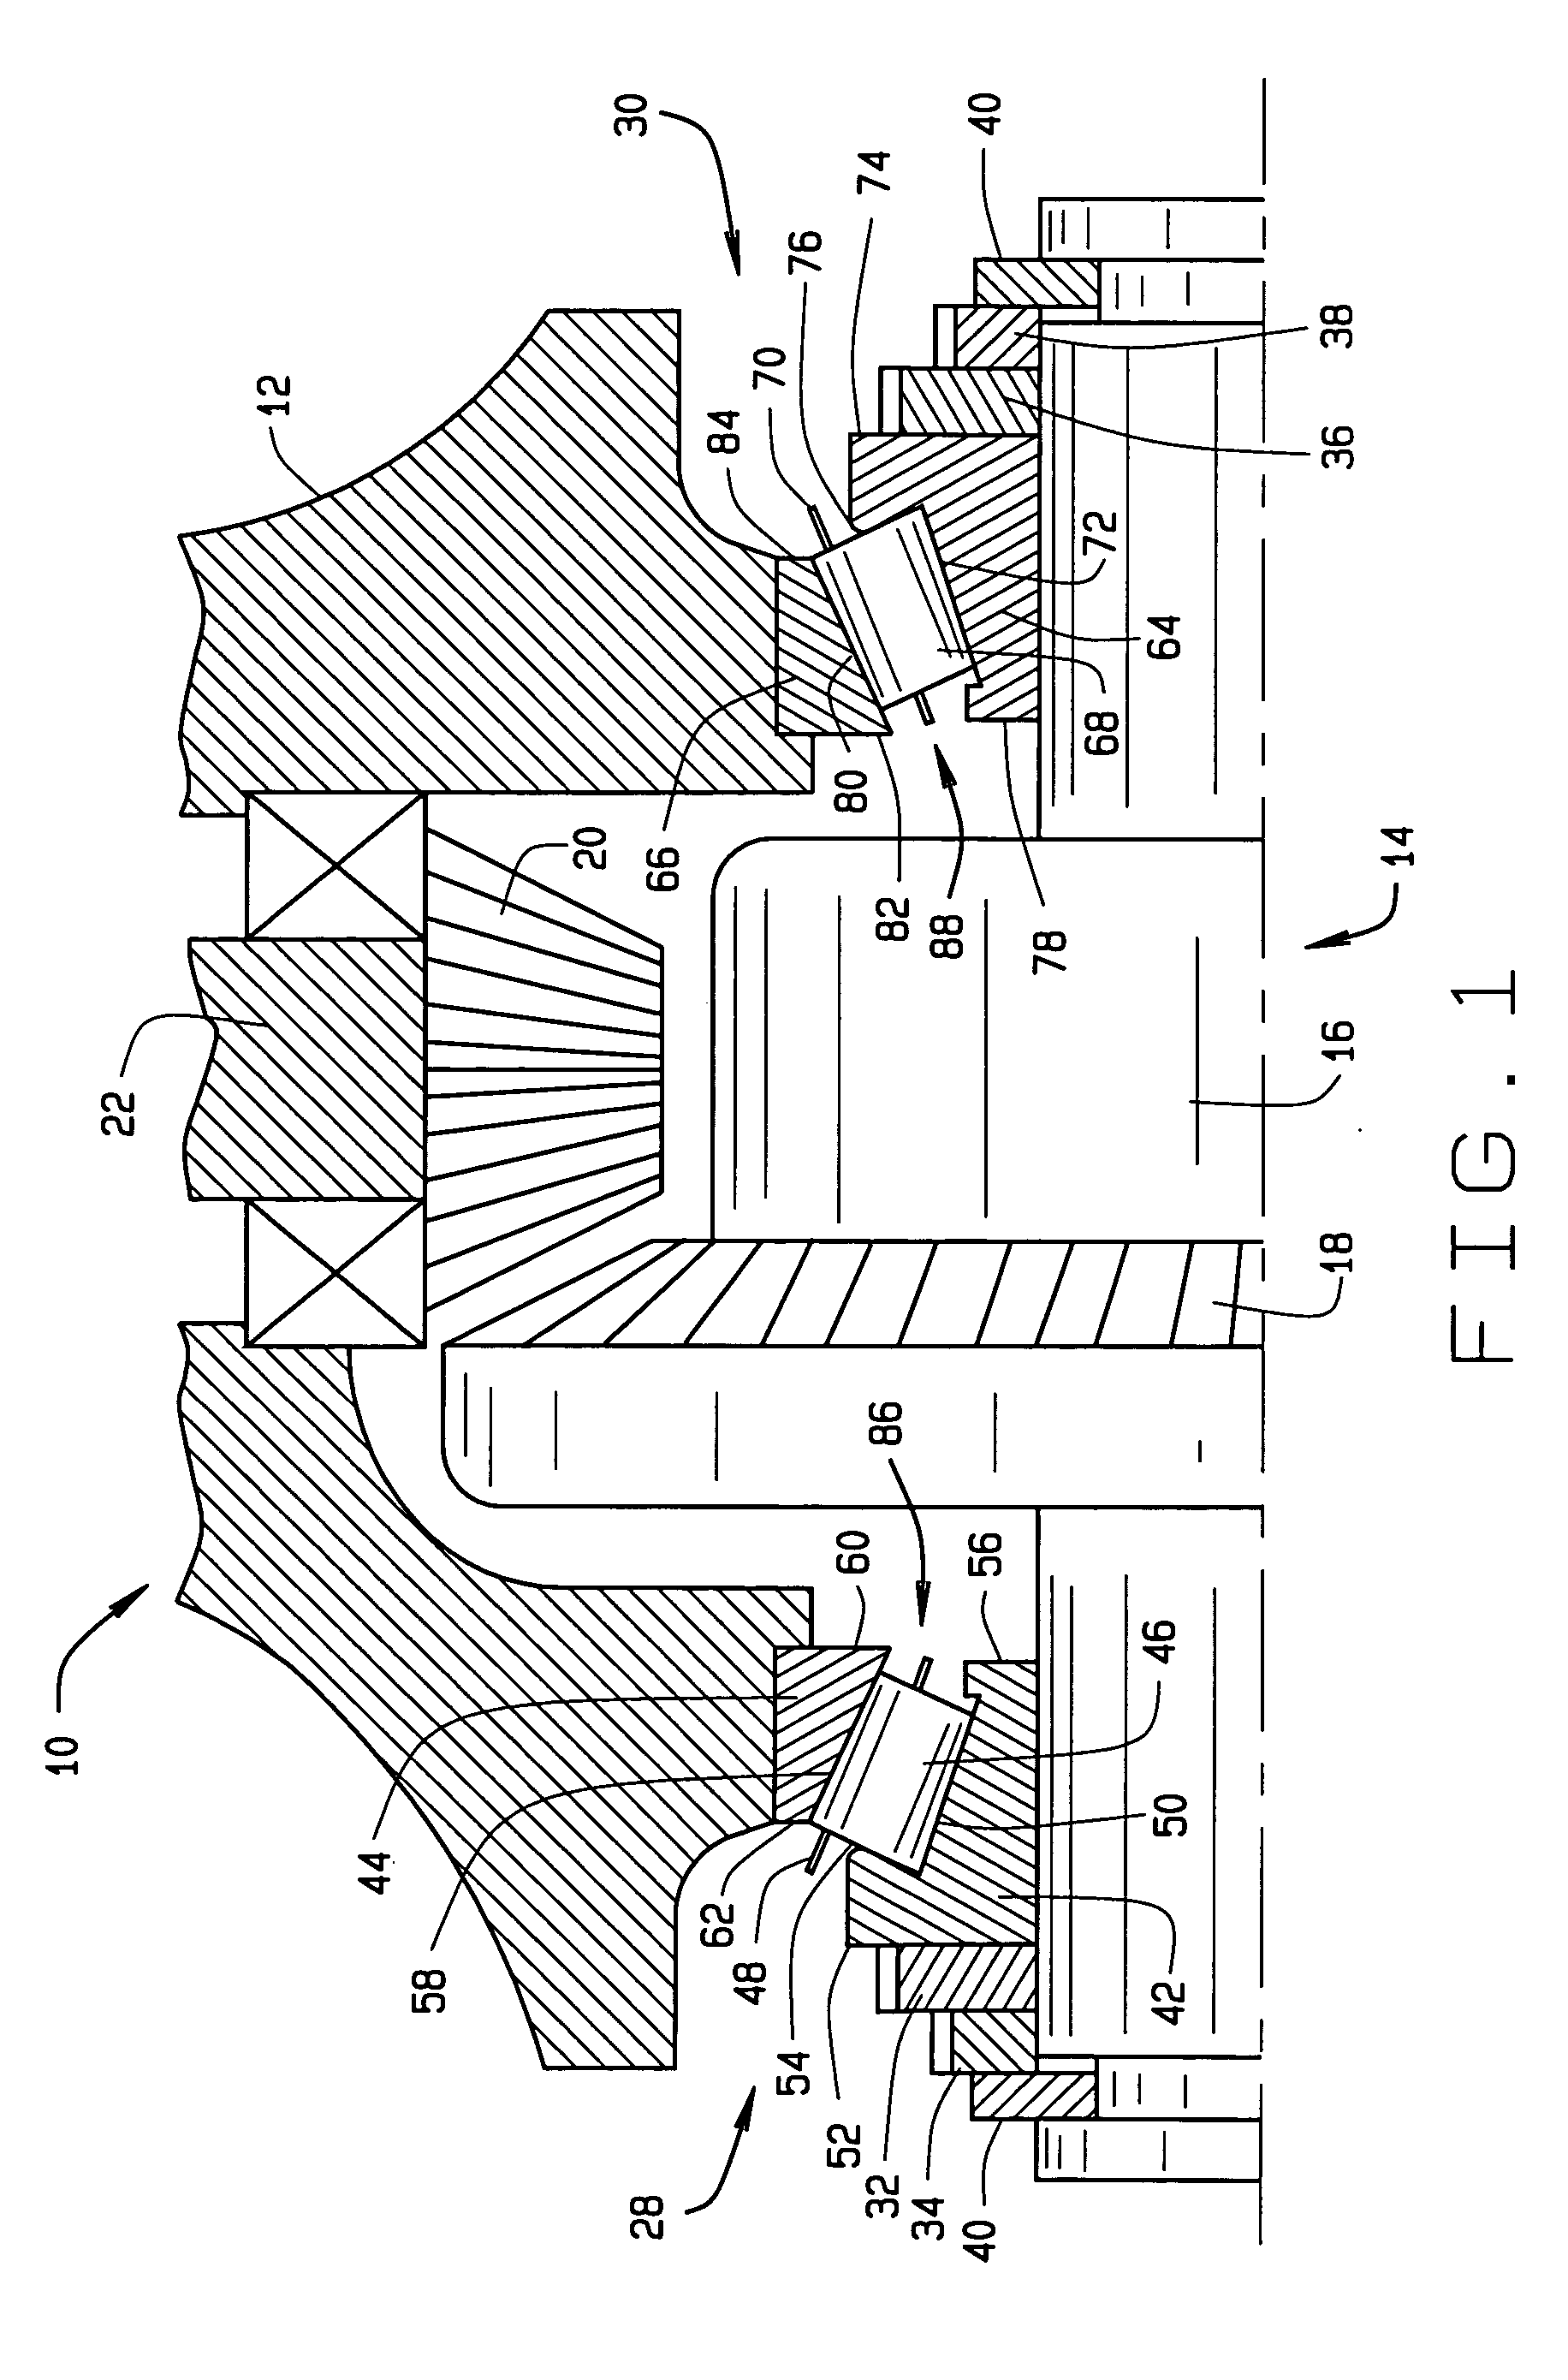 Thermally compensated differential